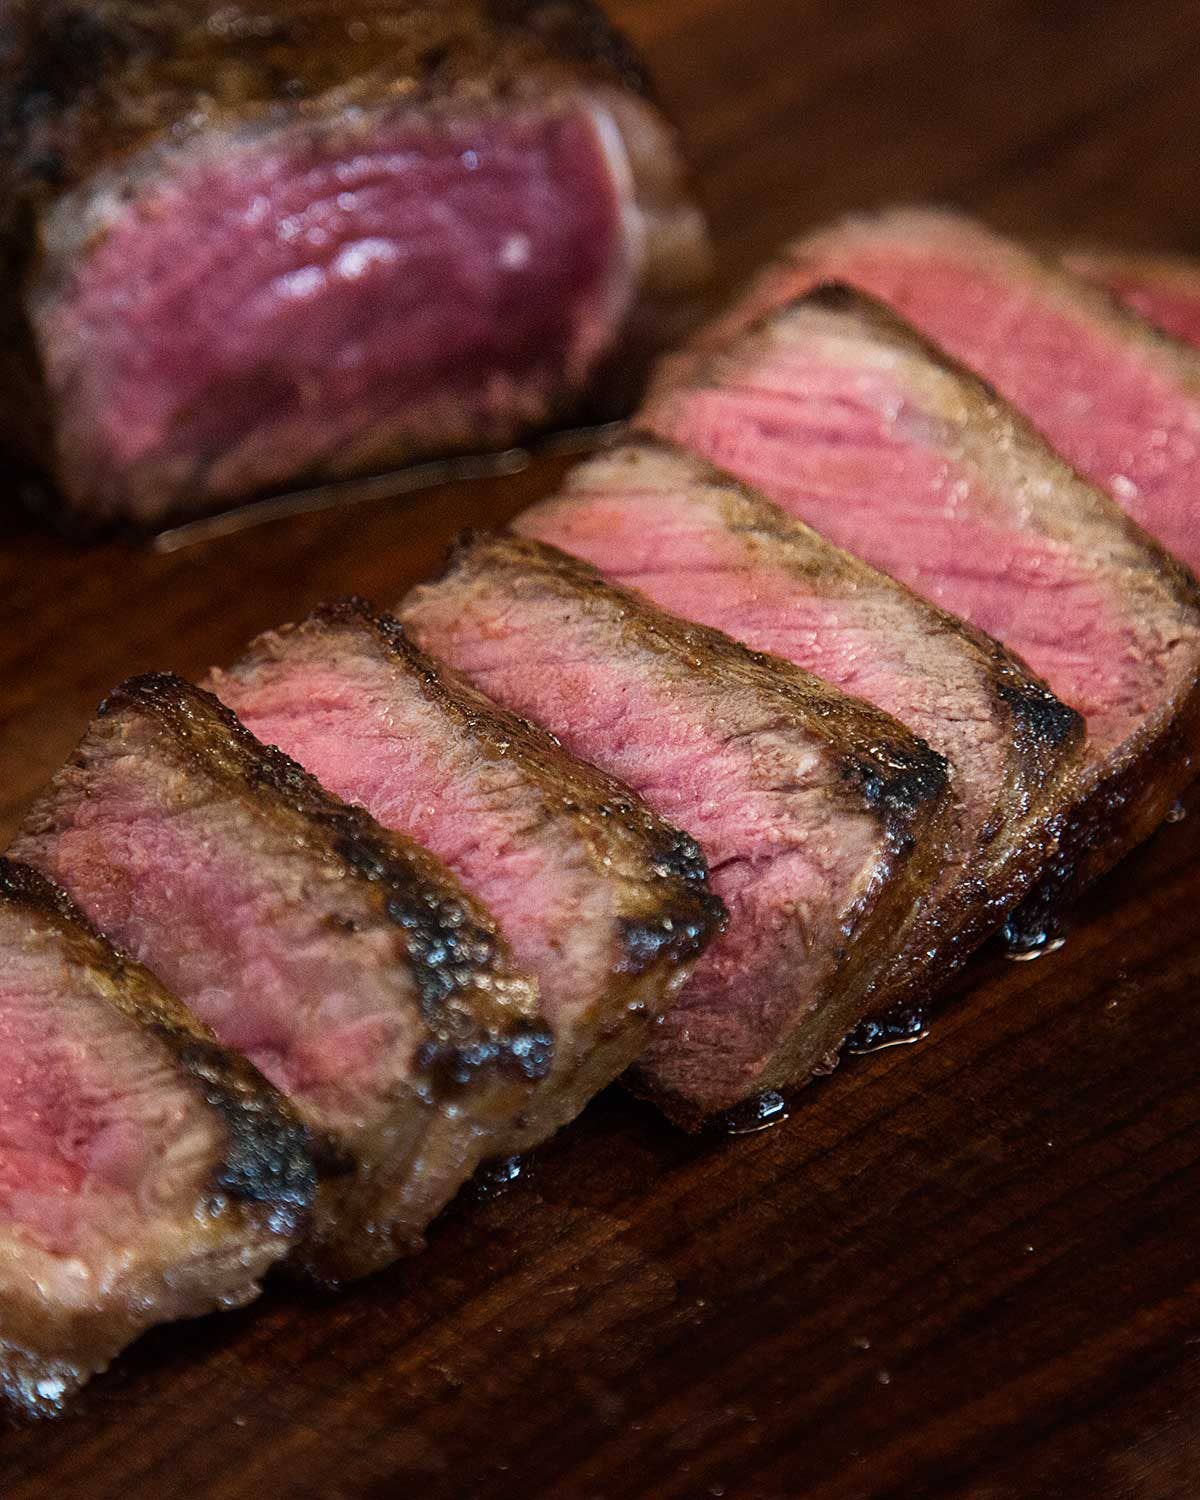 How to Cook Steak on the Stove